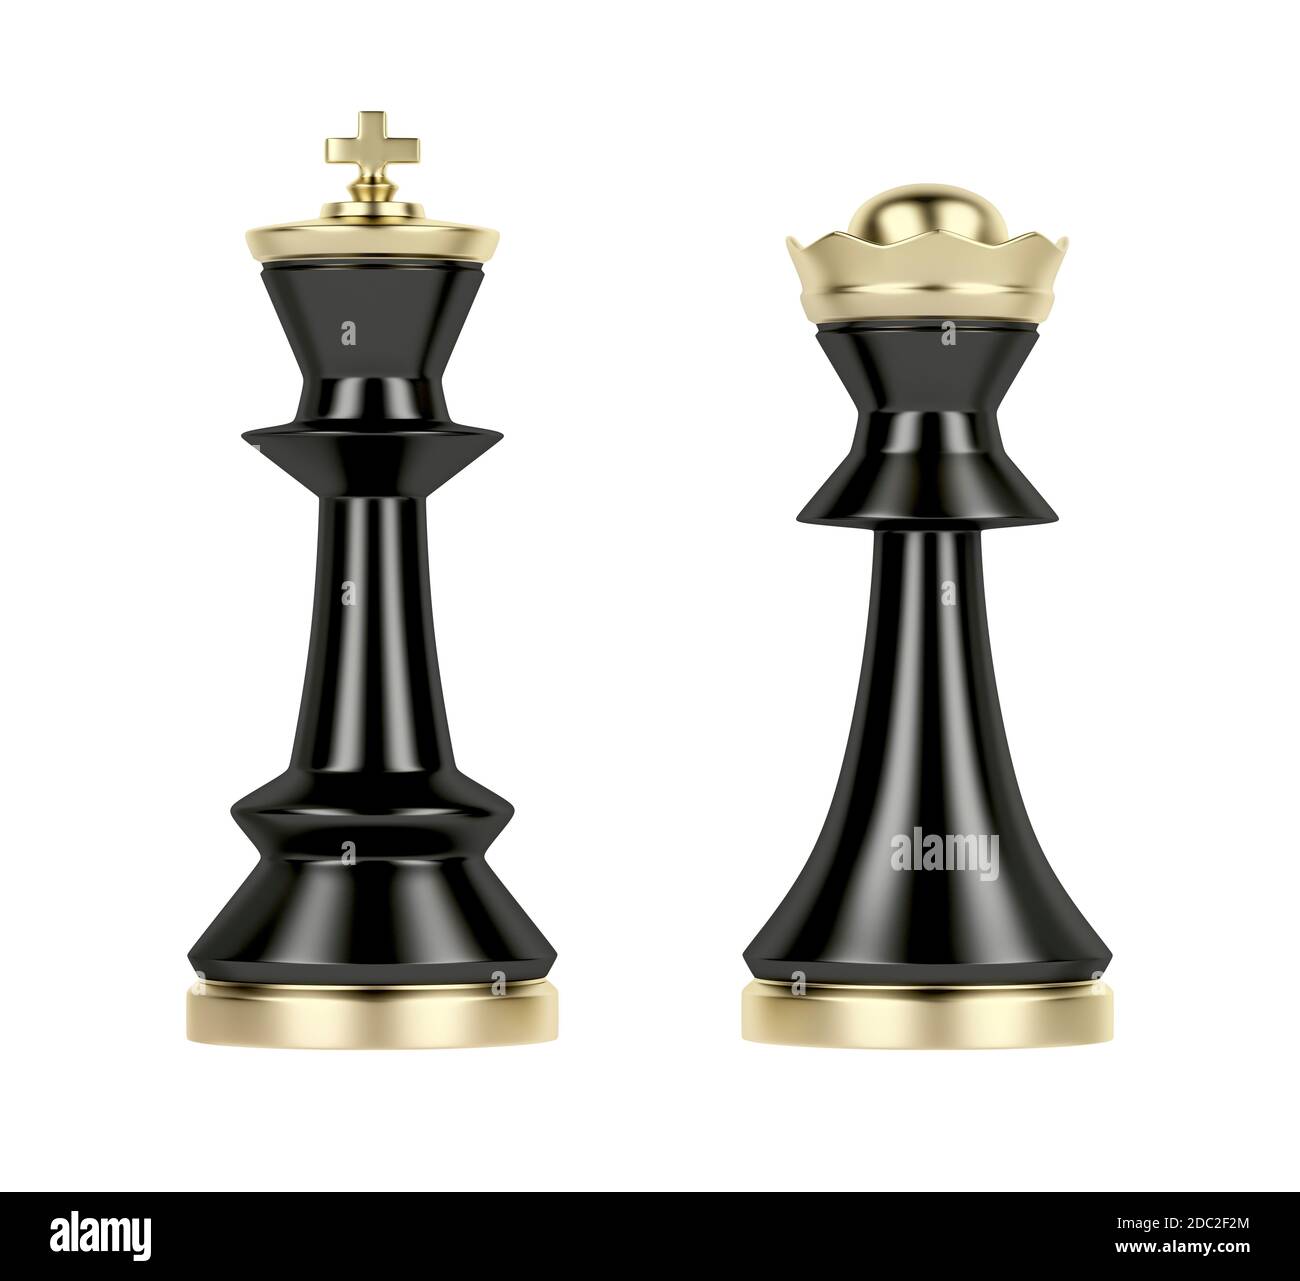 Black queen and king chess pieces on white background, front view Stock Photo